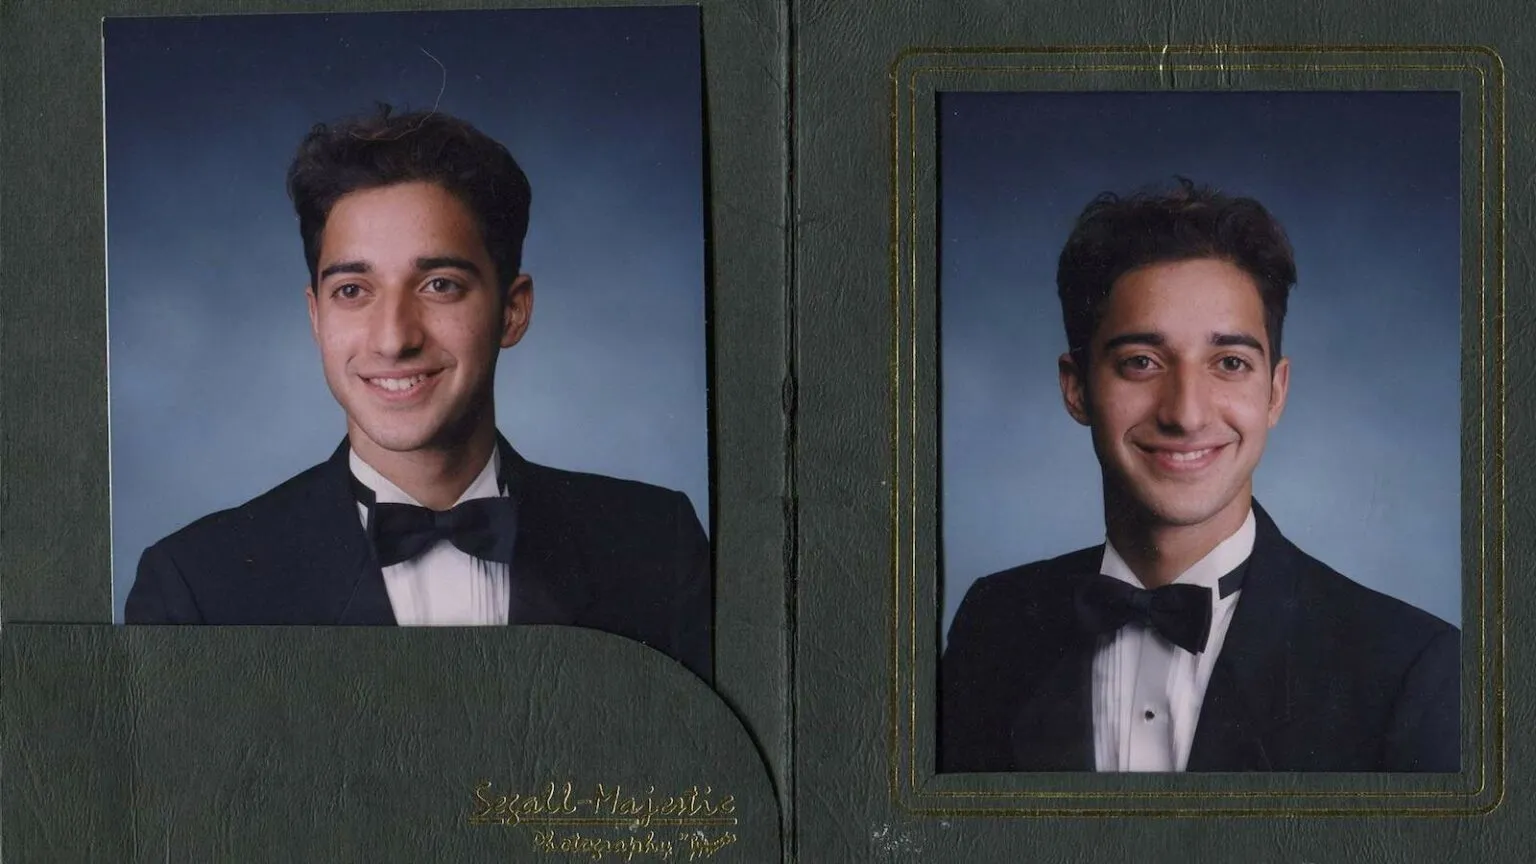 Murder Charges Against Serial Subject Adnan Syed Dropped